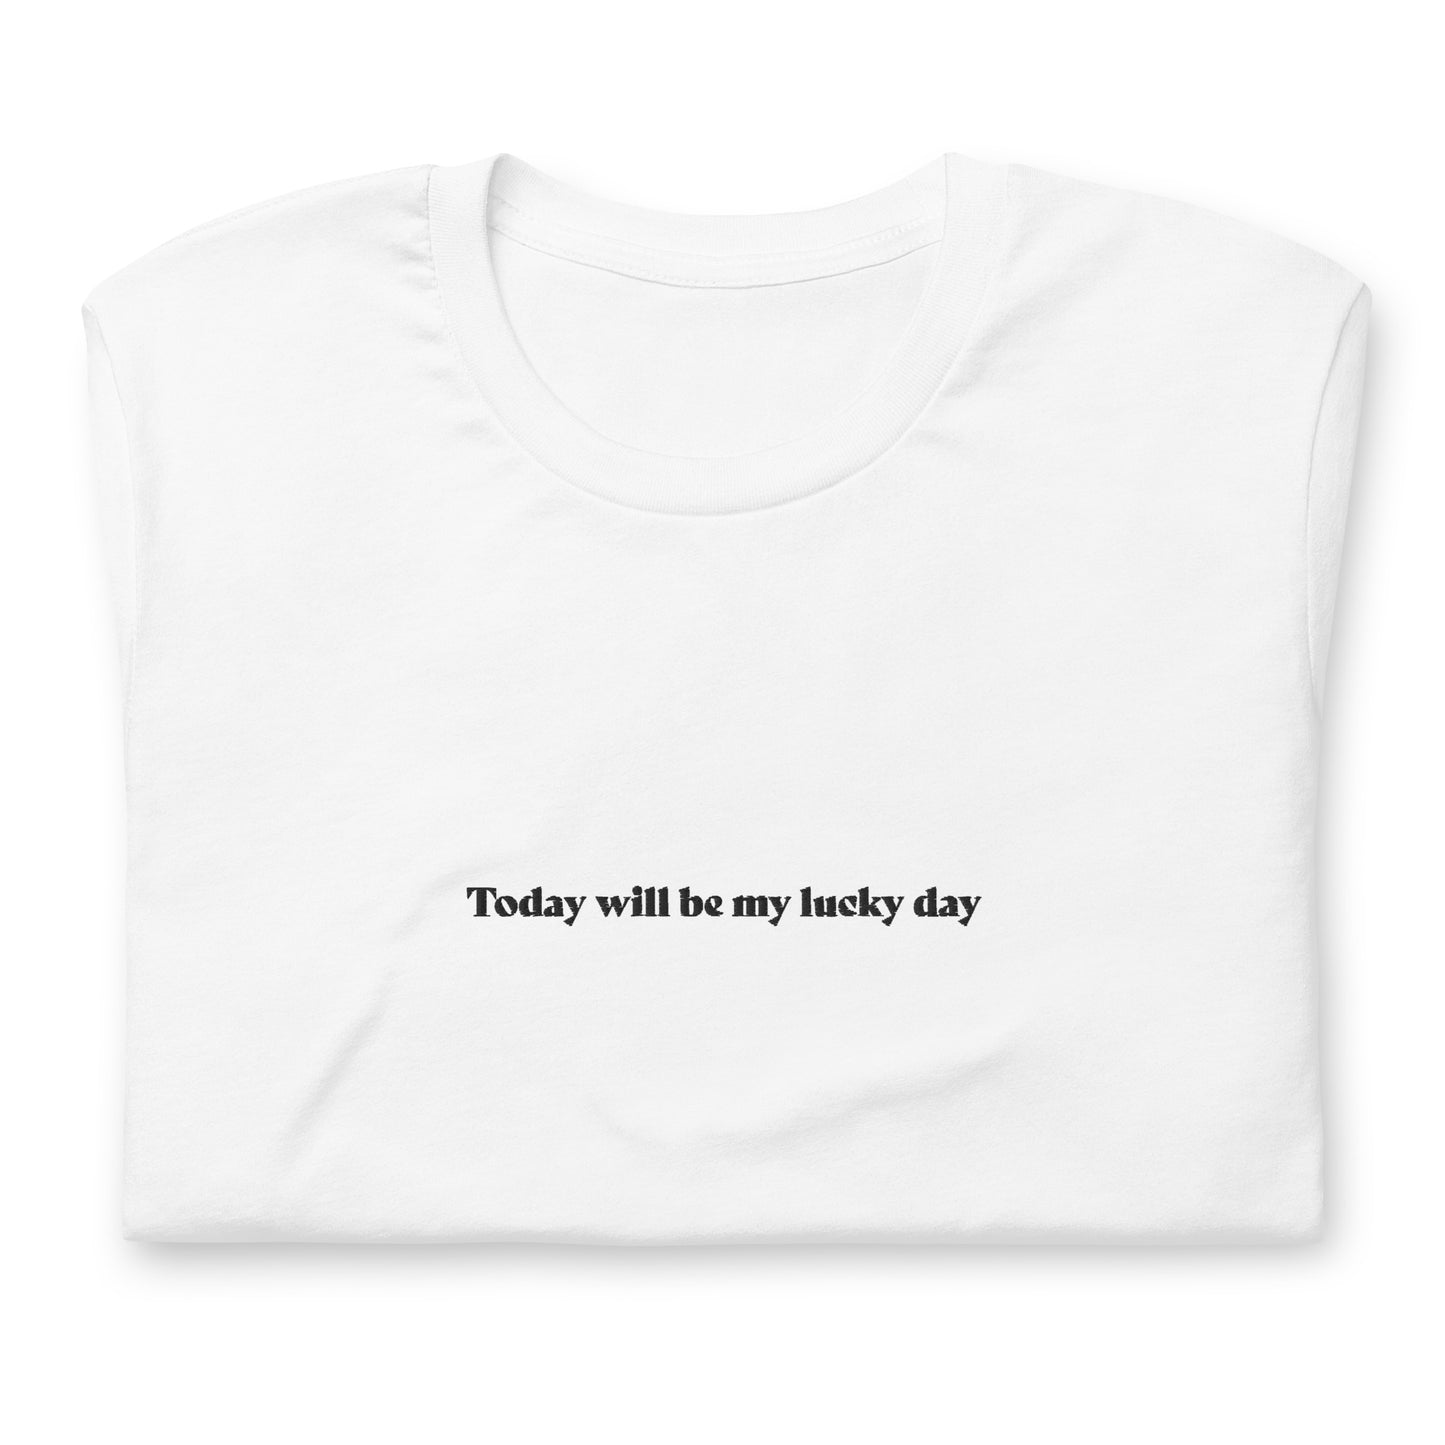 Today will be my lucky day - besticktes T-Shirt